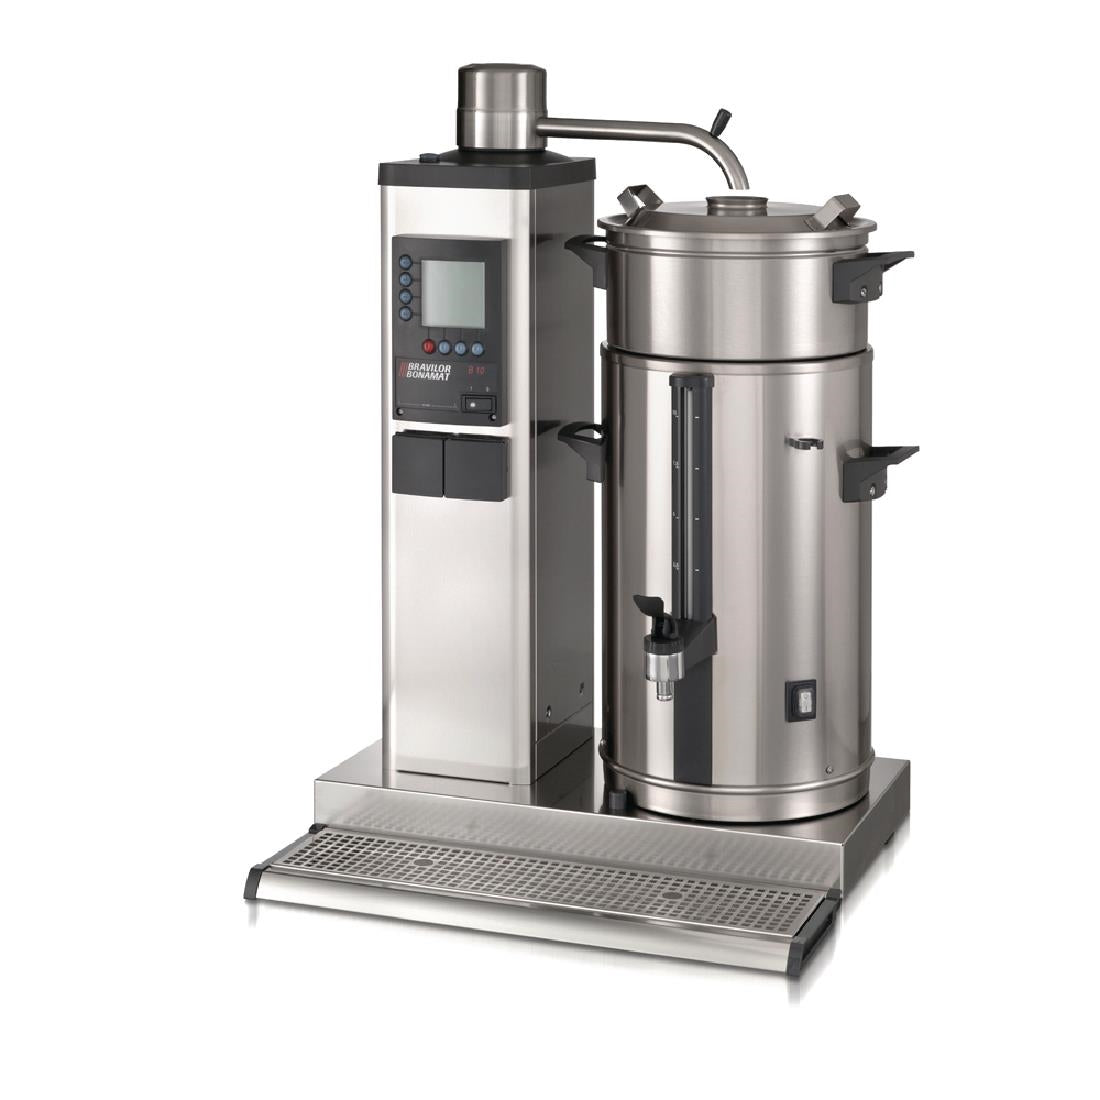 DC677-3P Bravilor B10 R Bulk Coffee Brewer with 10Ltr Coffee Urn Three Phase JD Catering Equipment Solutions Ltd